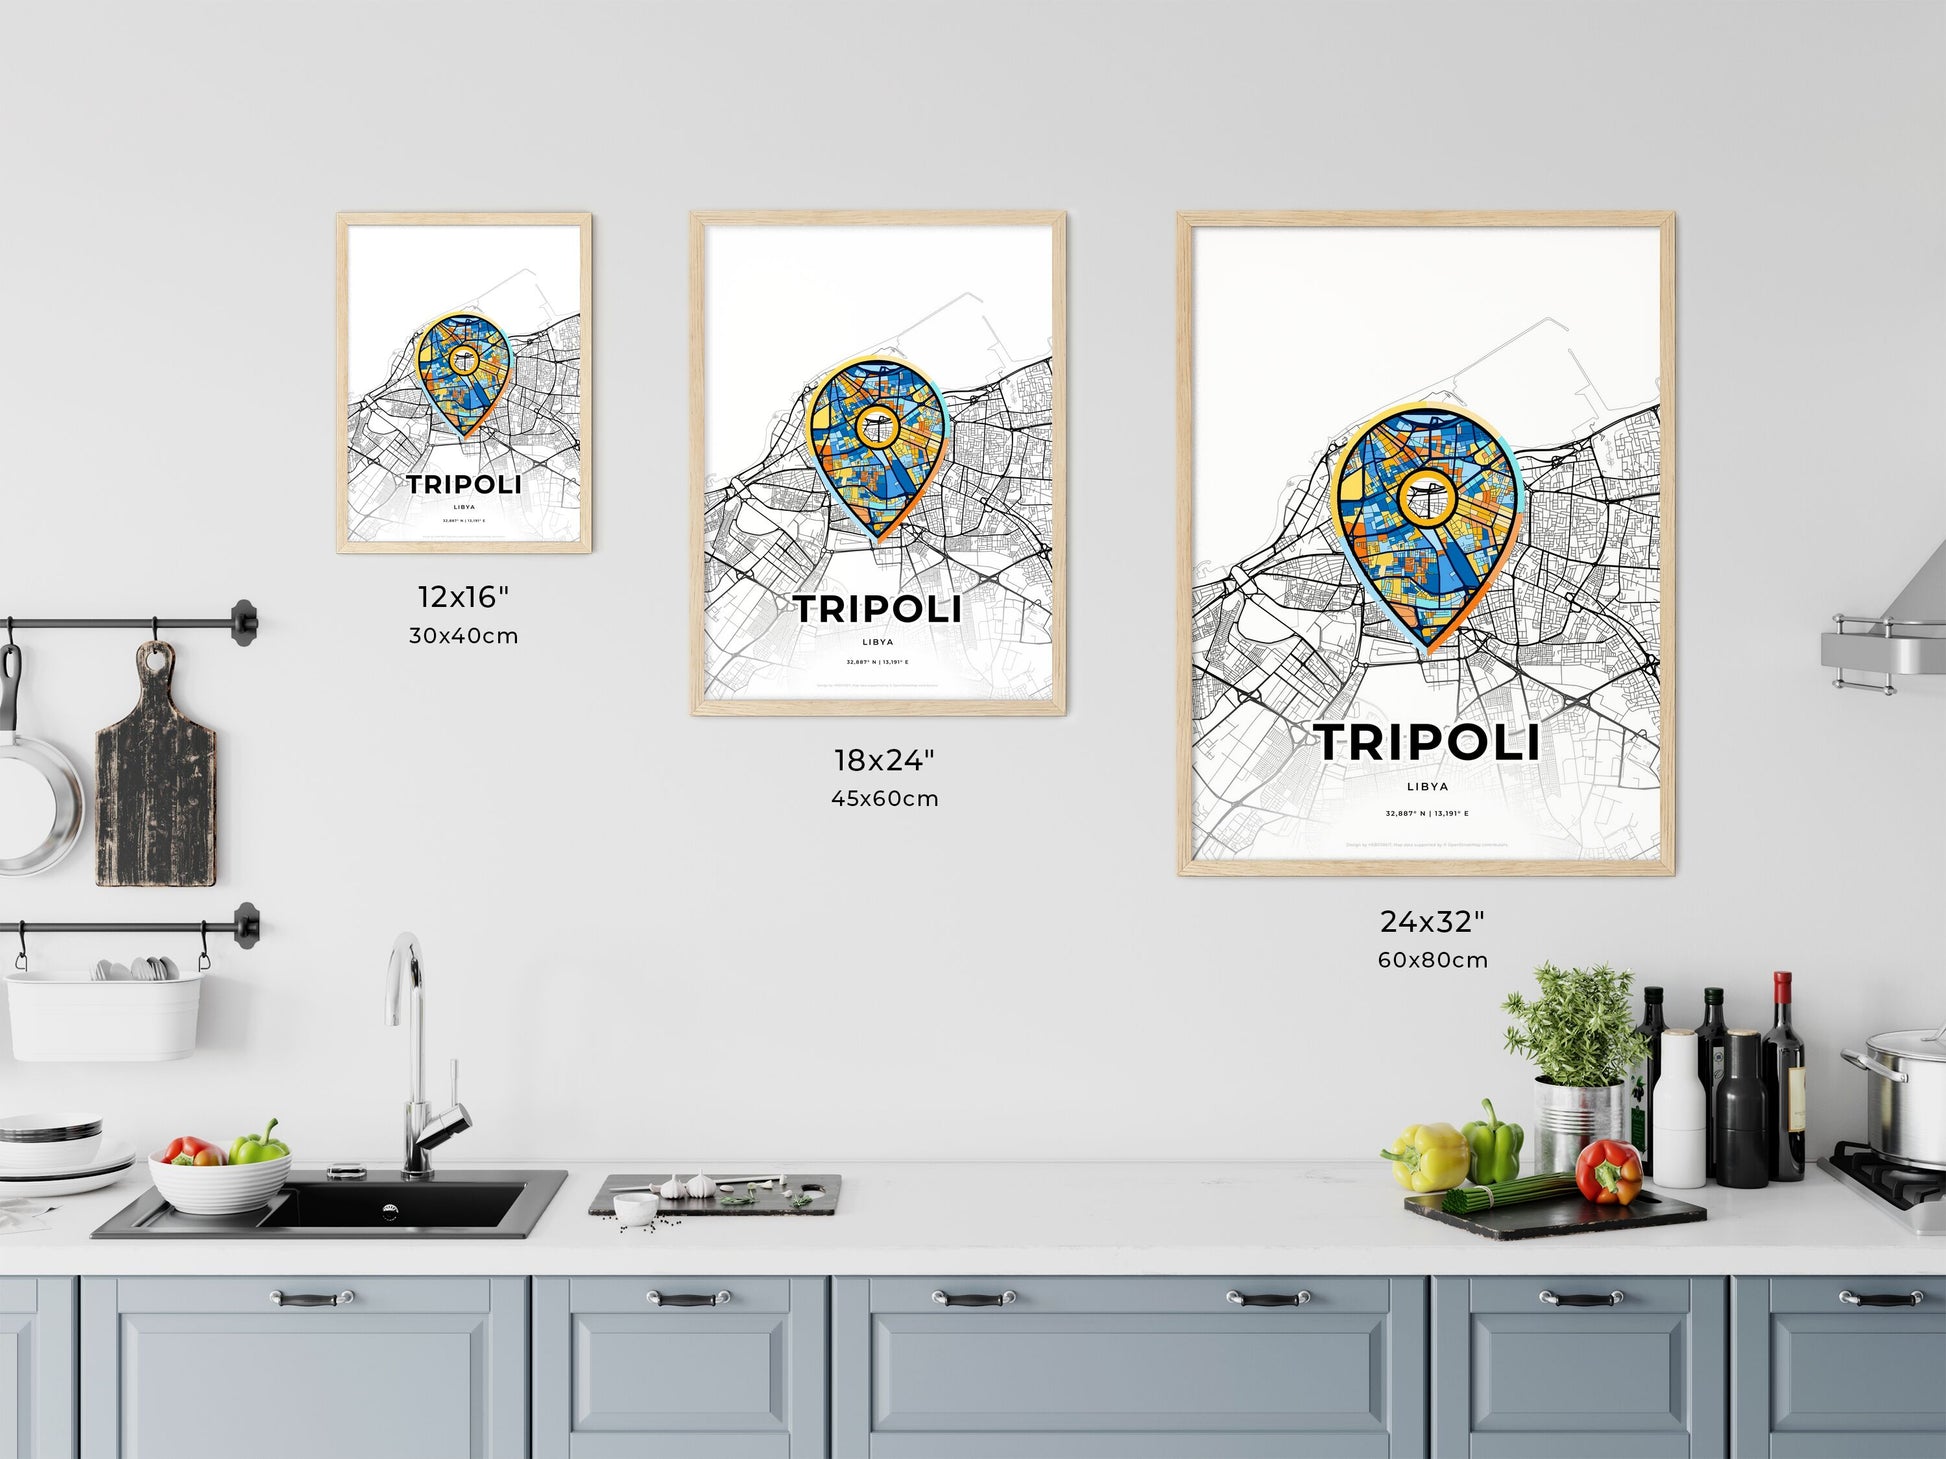 TRIPOLI LIBYA minimal art map with a colorful icon. Where it all began, Couple map gift.